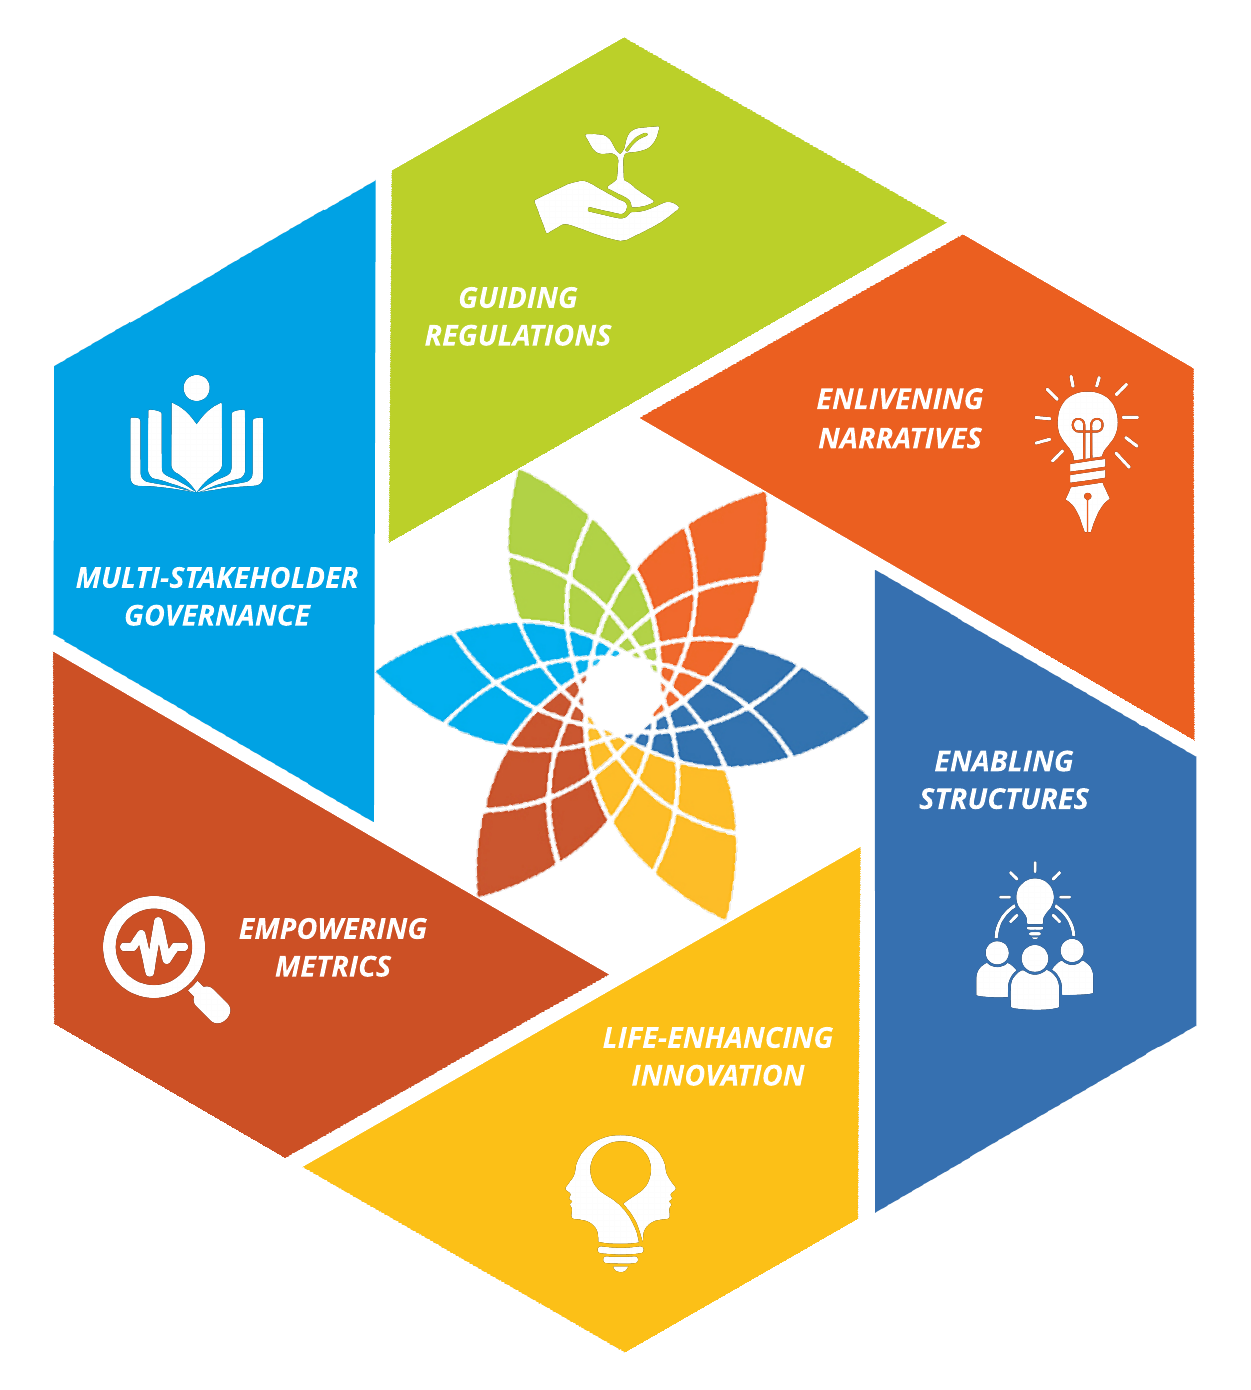 Graphic with the 6 transformation enablers based on the collective leadership compass